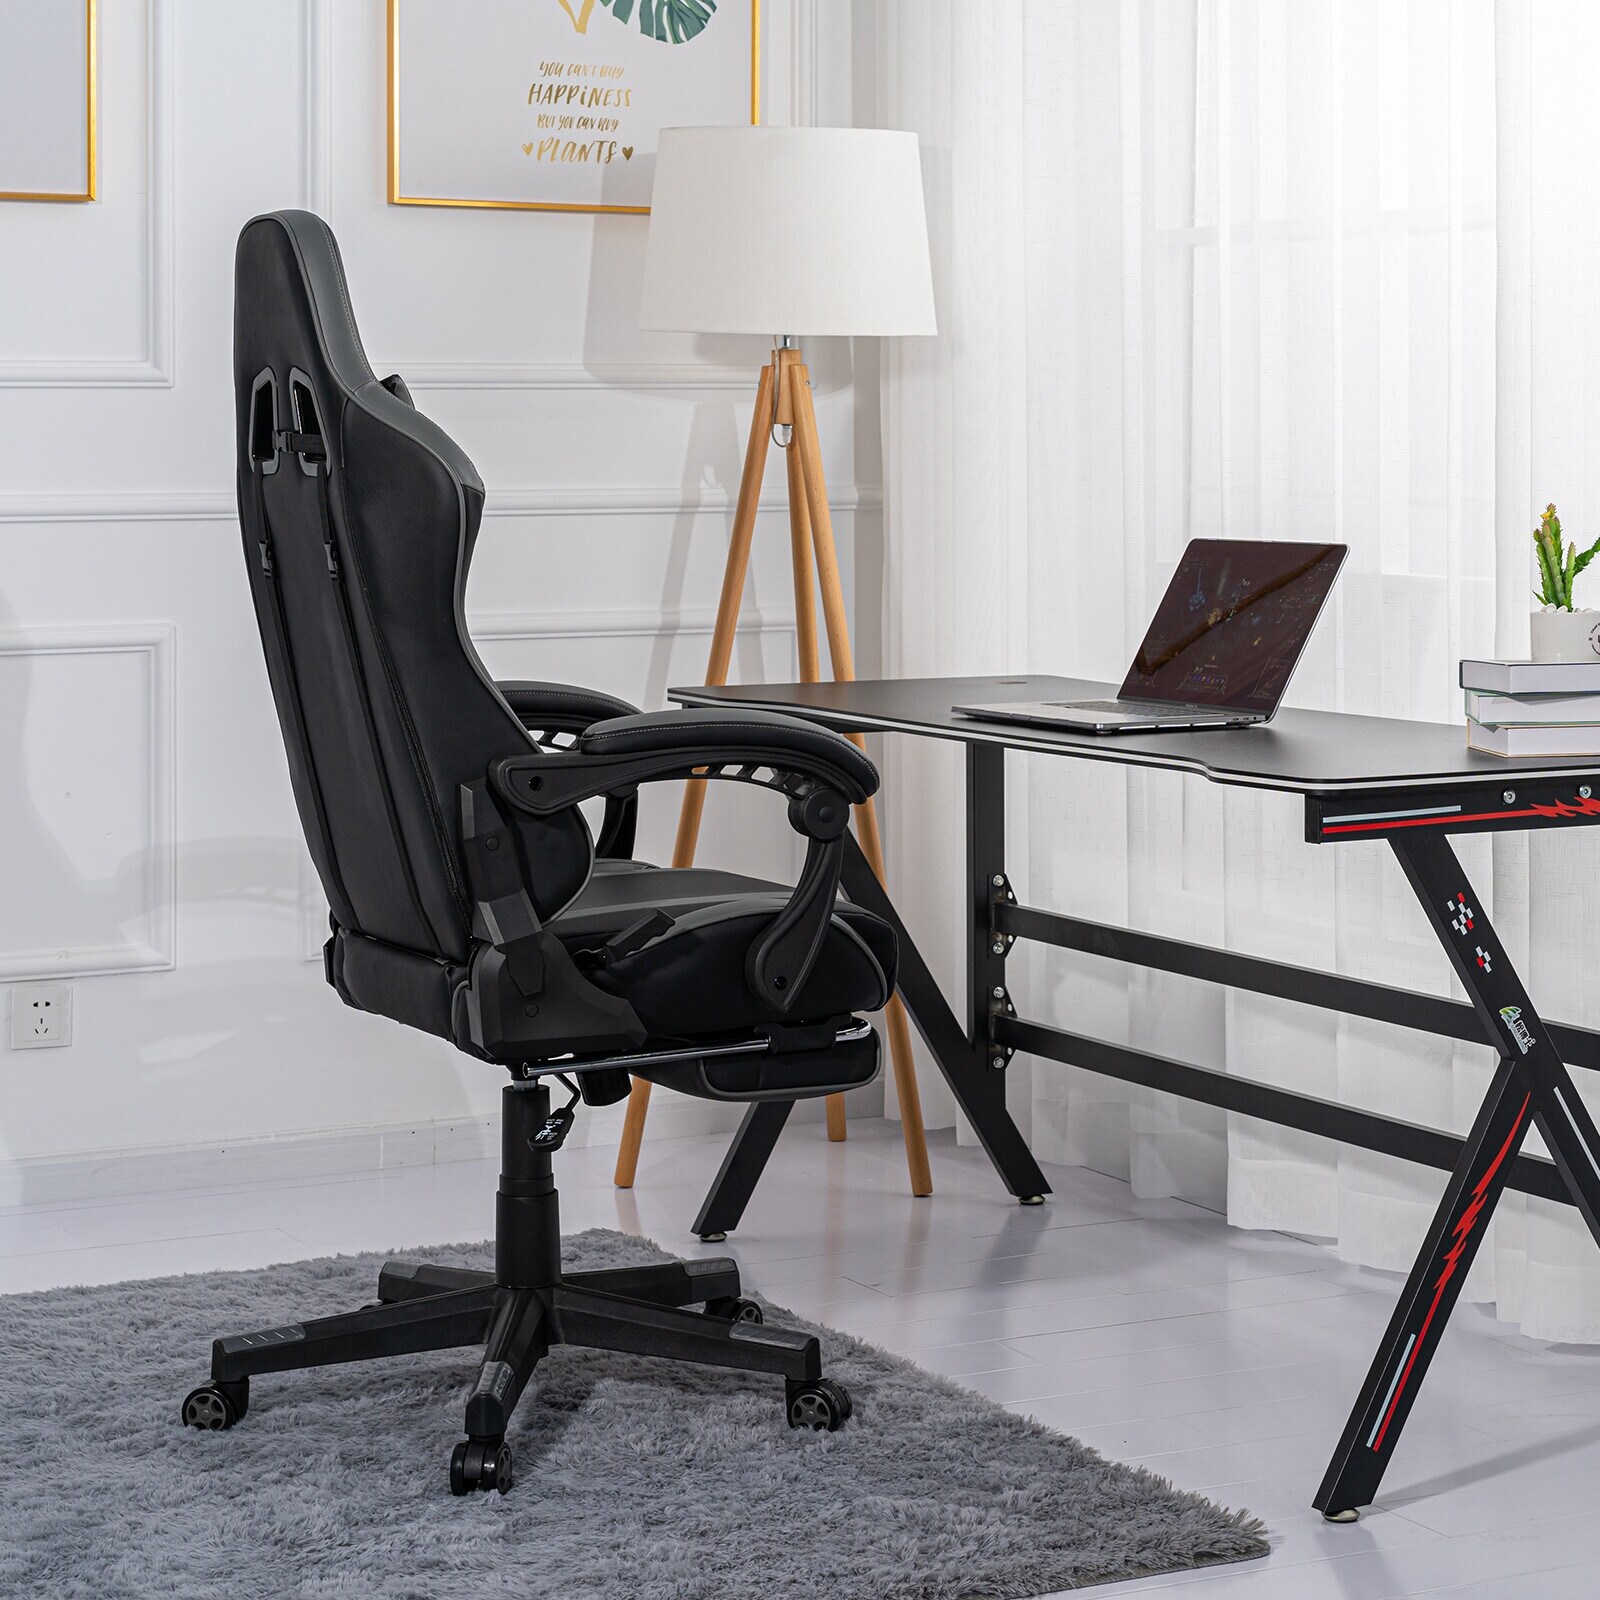 https://ak1.ostkcdn.com/images/products/is/images/direct/886f8db2840b09e6a7f0f727f1fc4c595200c10f/Commodore-Gaming-Chair-Ergonomic-Adjustable-Height-Swivel-Recliner-with-Adjustable-Armrest-and-Retractable-Footrest.jpg